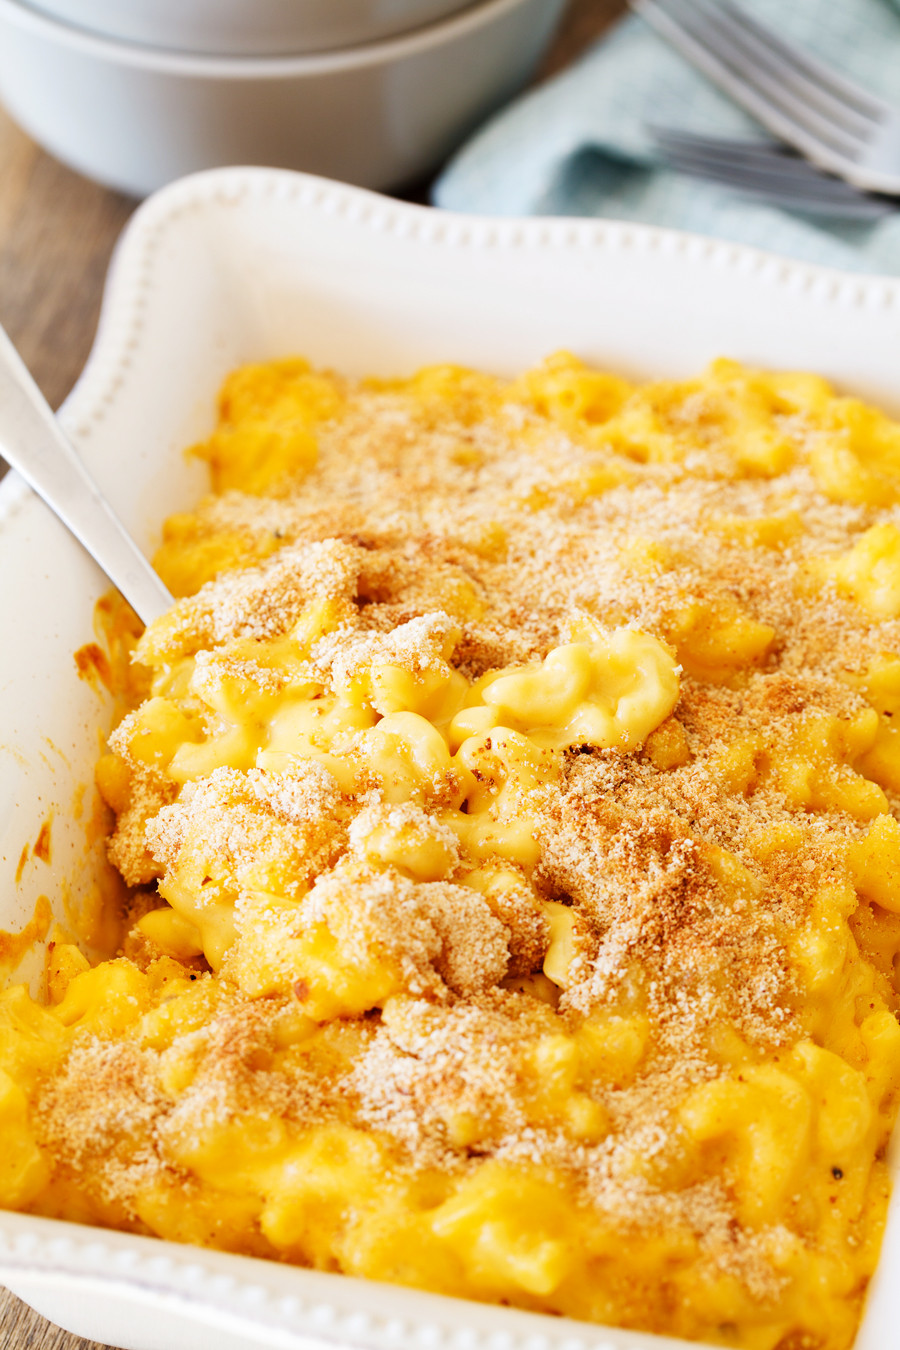 Recipes For Baked Macaroni And Cheese With Bread Crumbs
 Easy Baked Macaroni & Cheese Made To Be A Momma